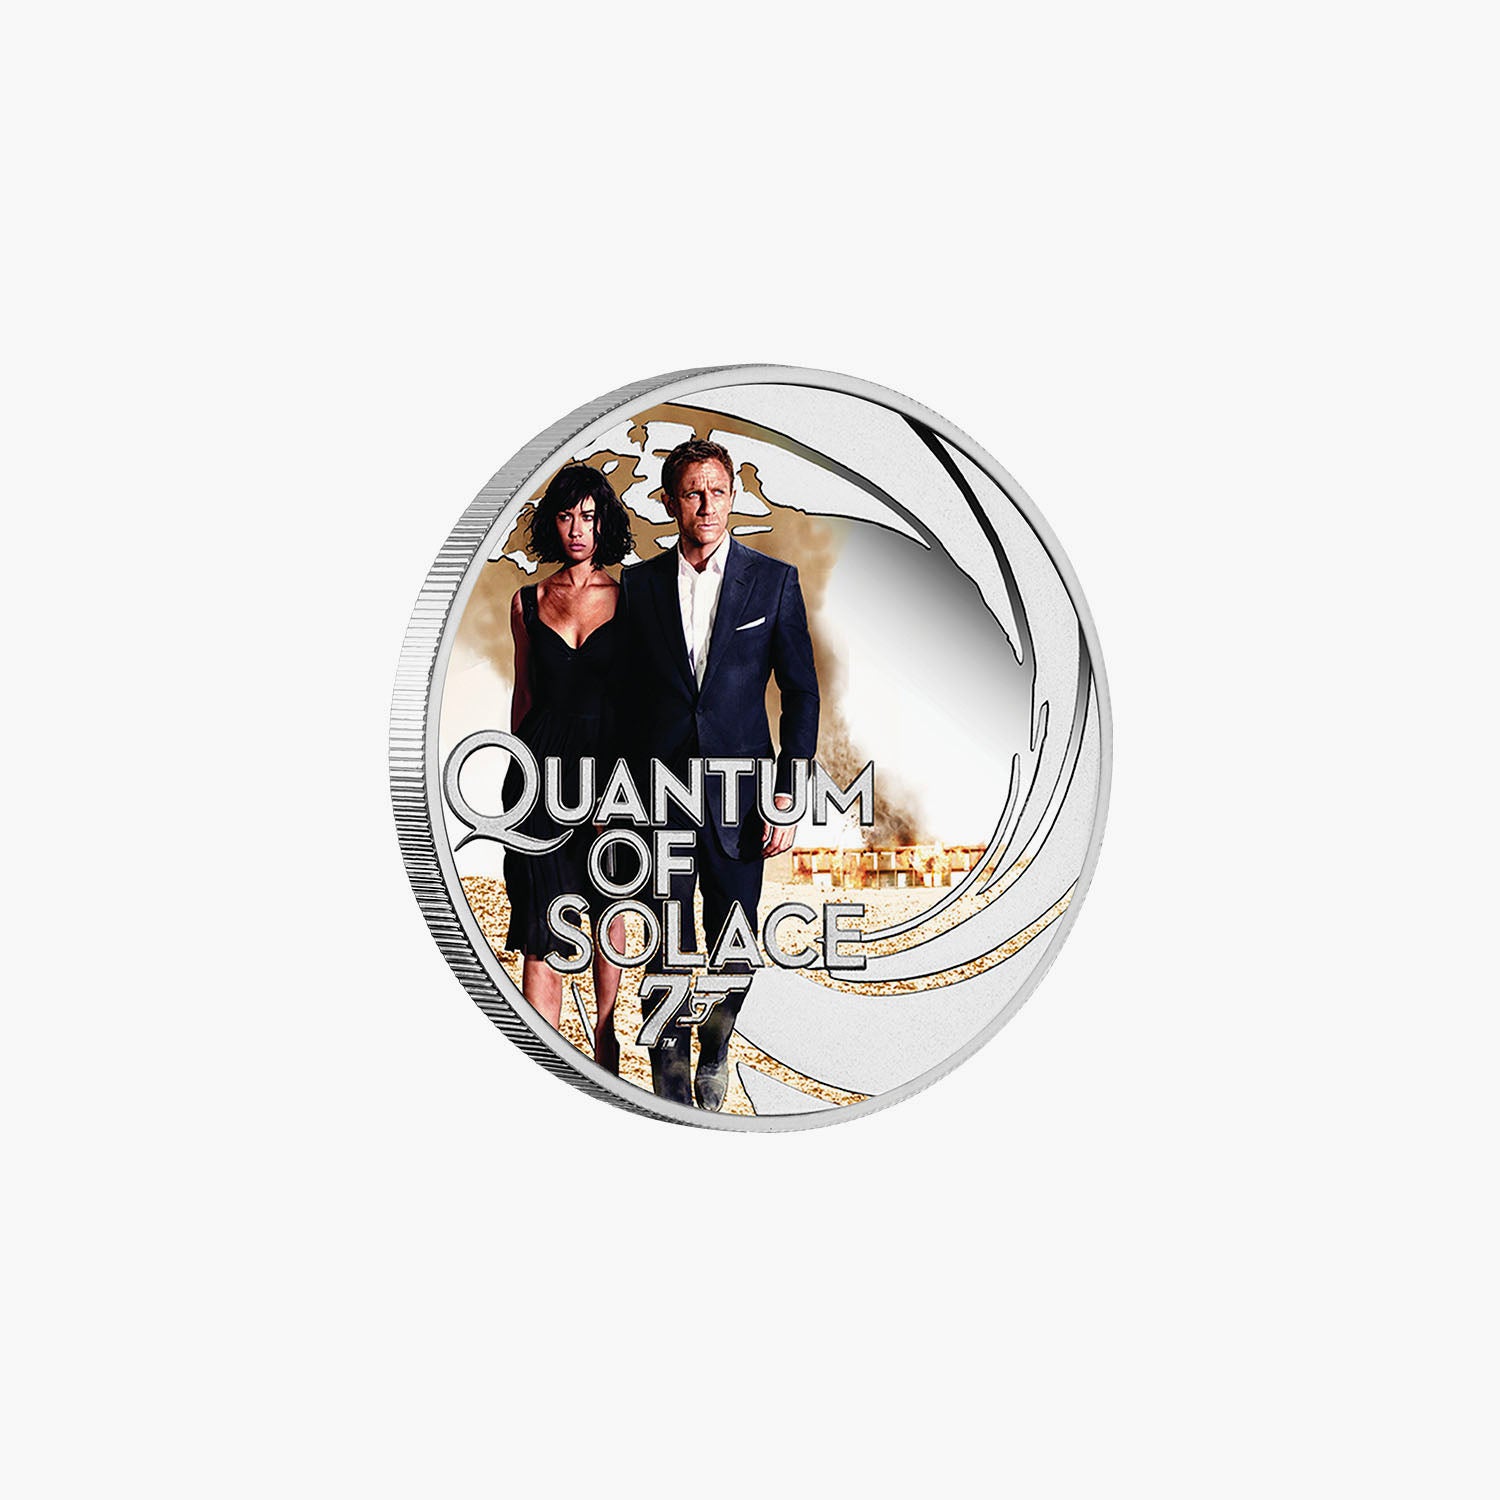 James Bond - Quantum of Solace Solid Silver Movie Coin